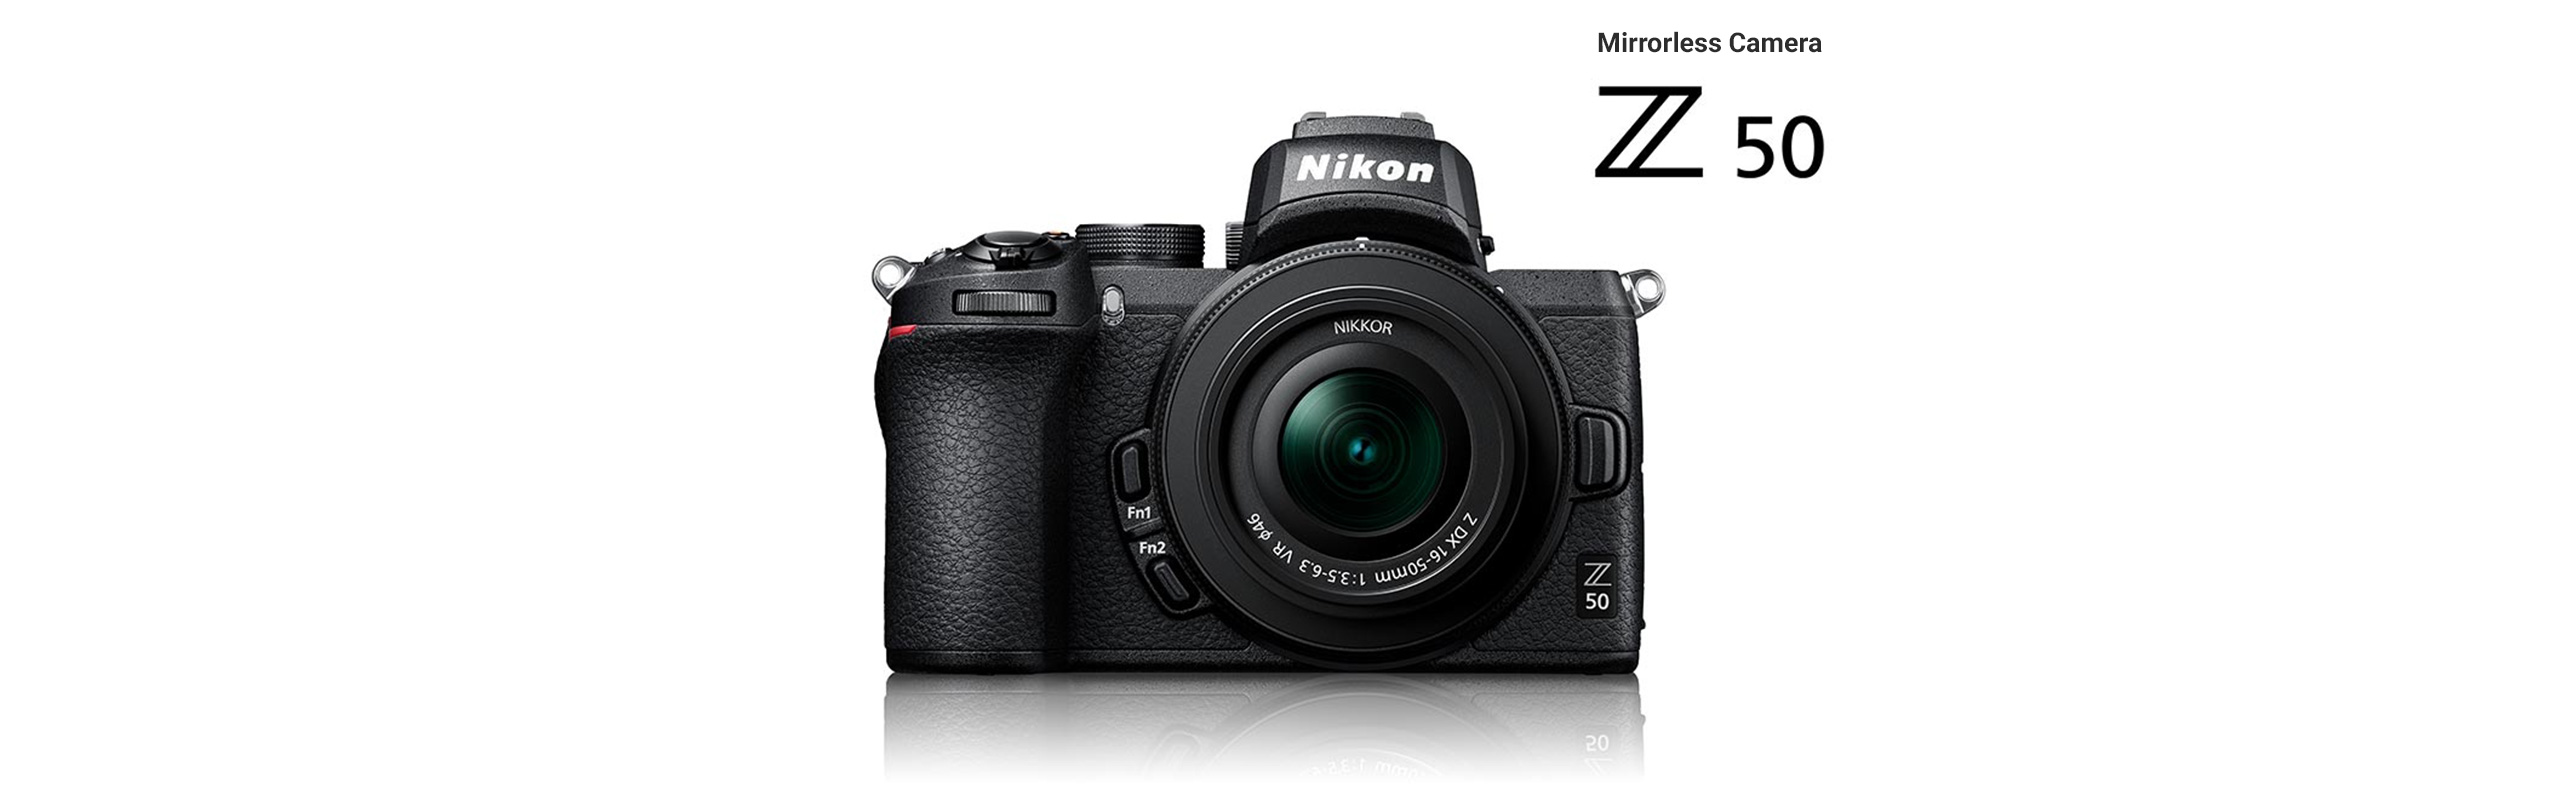 The compact mirrorless Z 50 packs mighty technologies, Stories